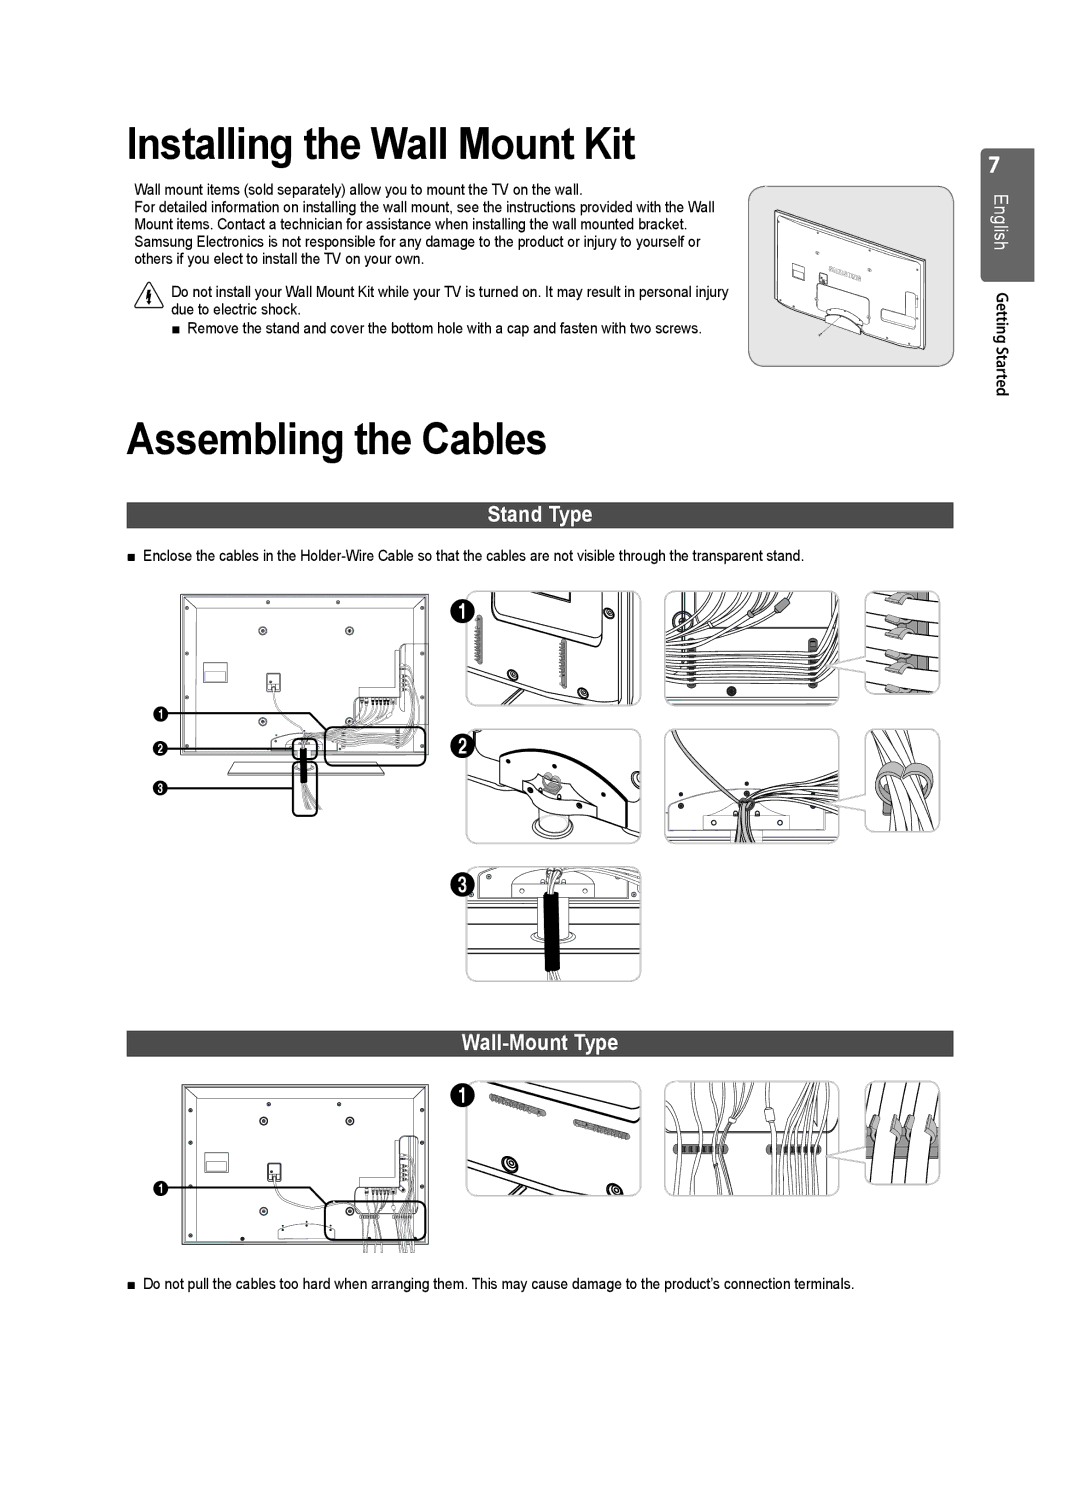 Samsung UE37B6000VWXXH, UE37B6000VWXXC Installing the Wall Mount Kit, Assembling the Cables, Stand Type, Wall-Mount Type 